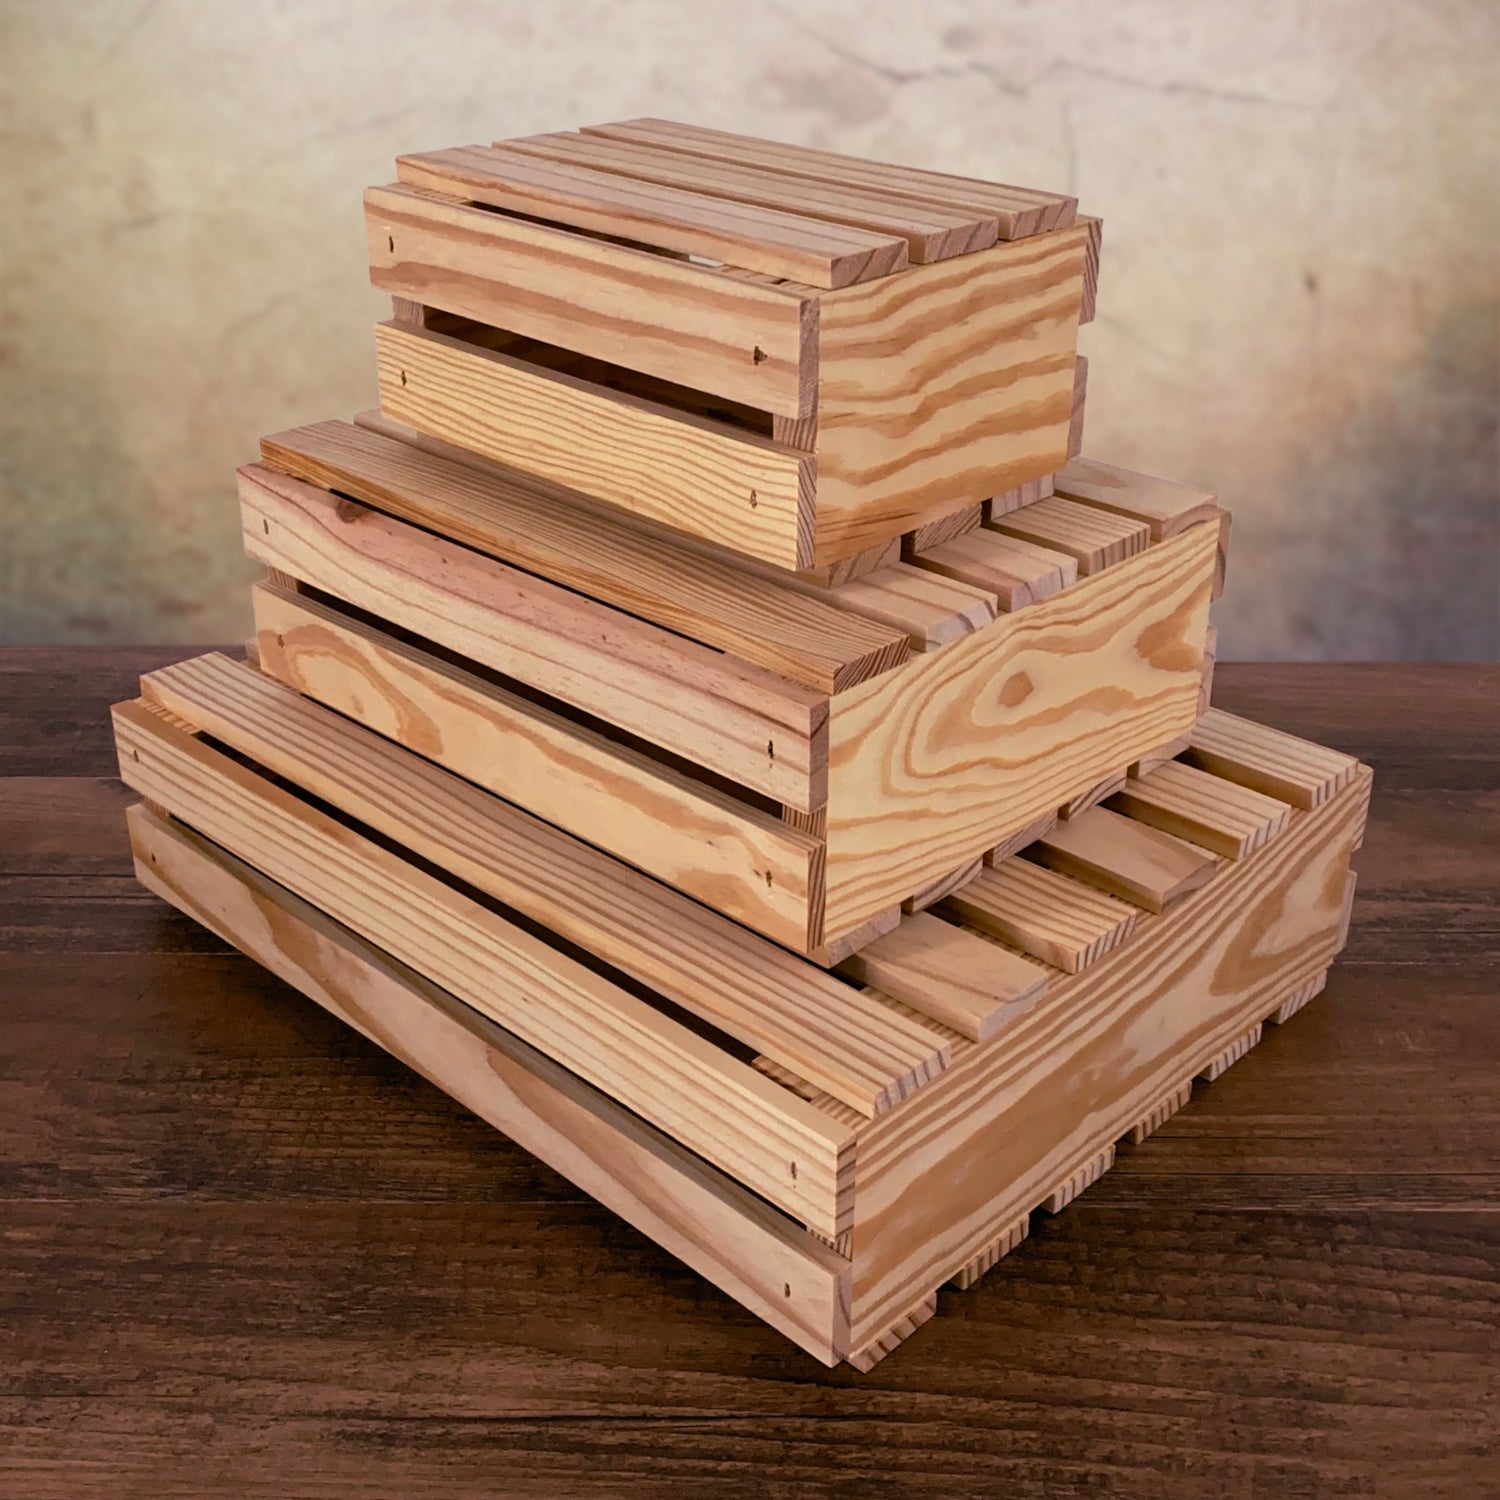 Collection of open slat wood crates by Carpenter Core